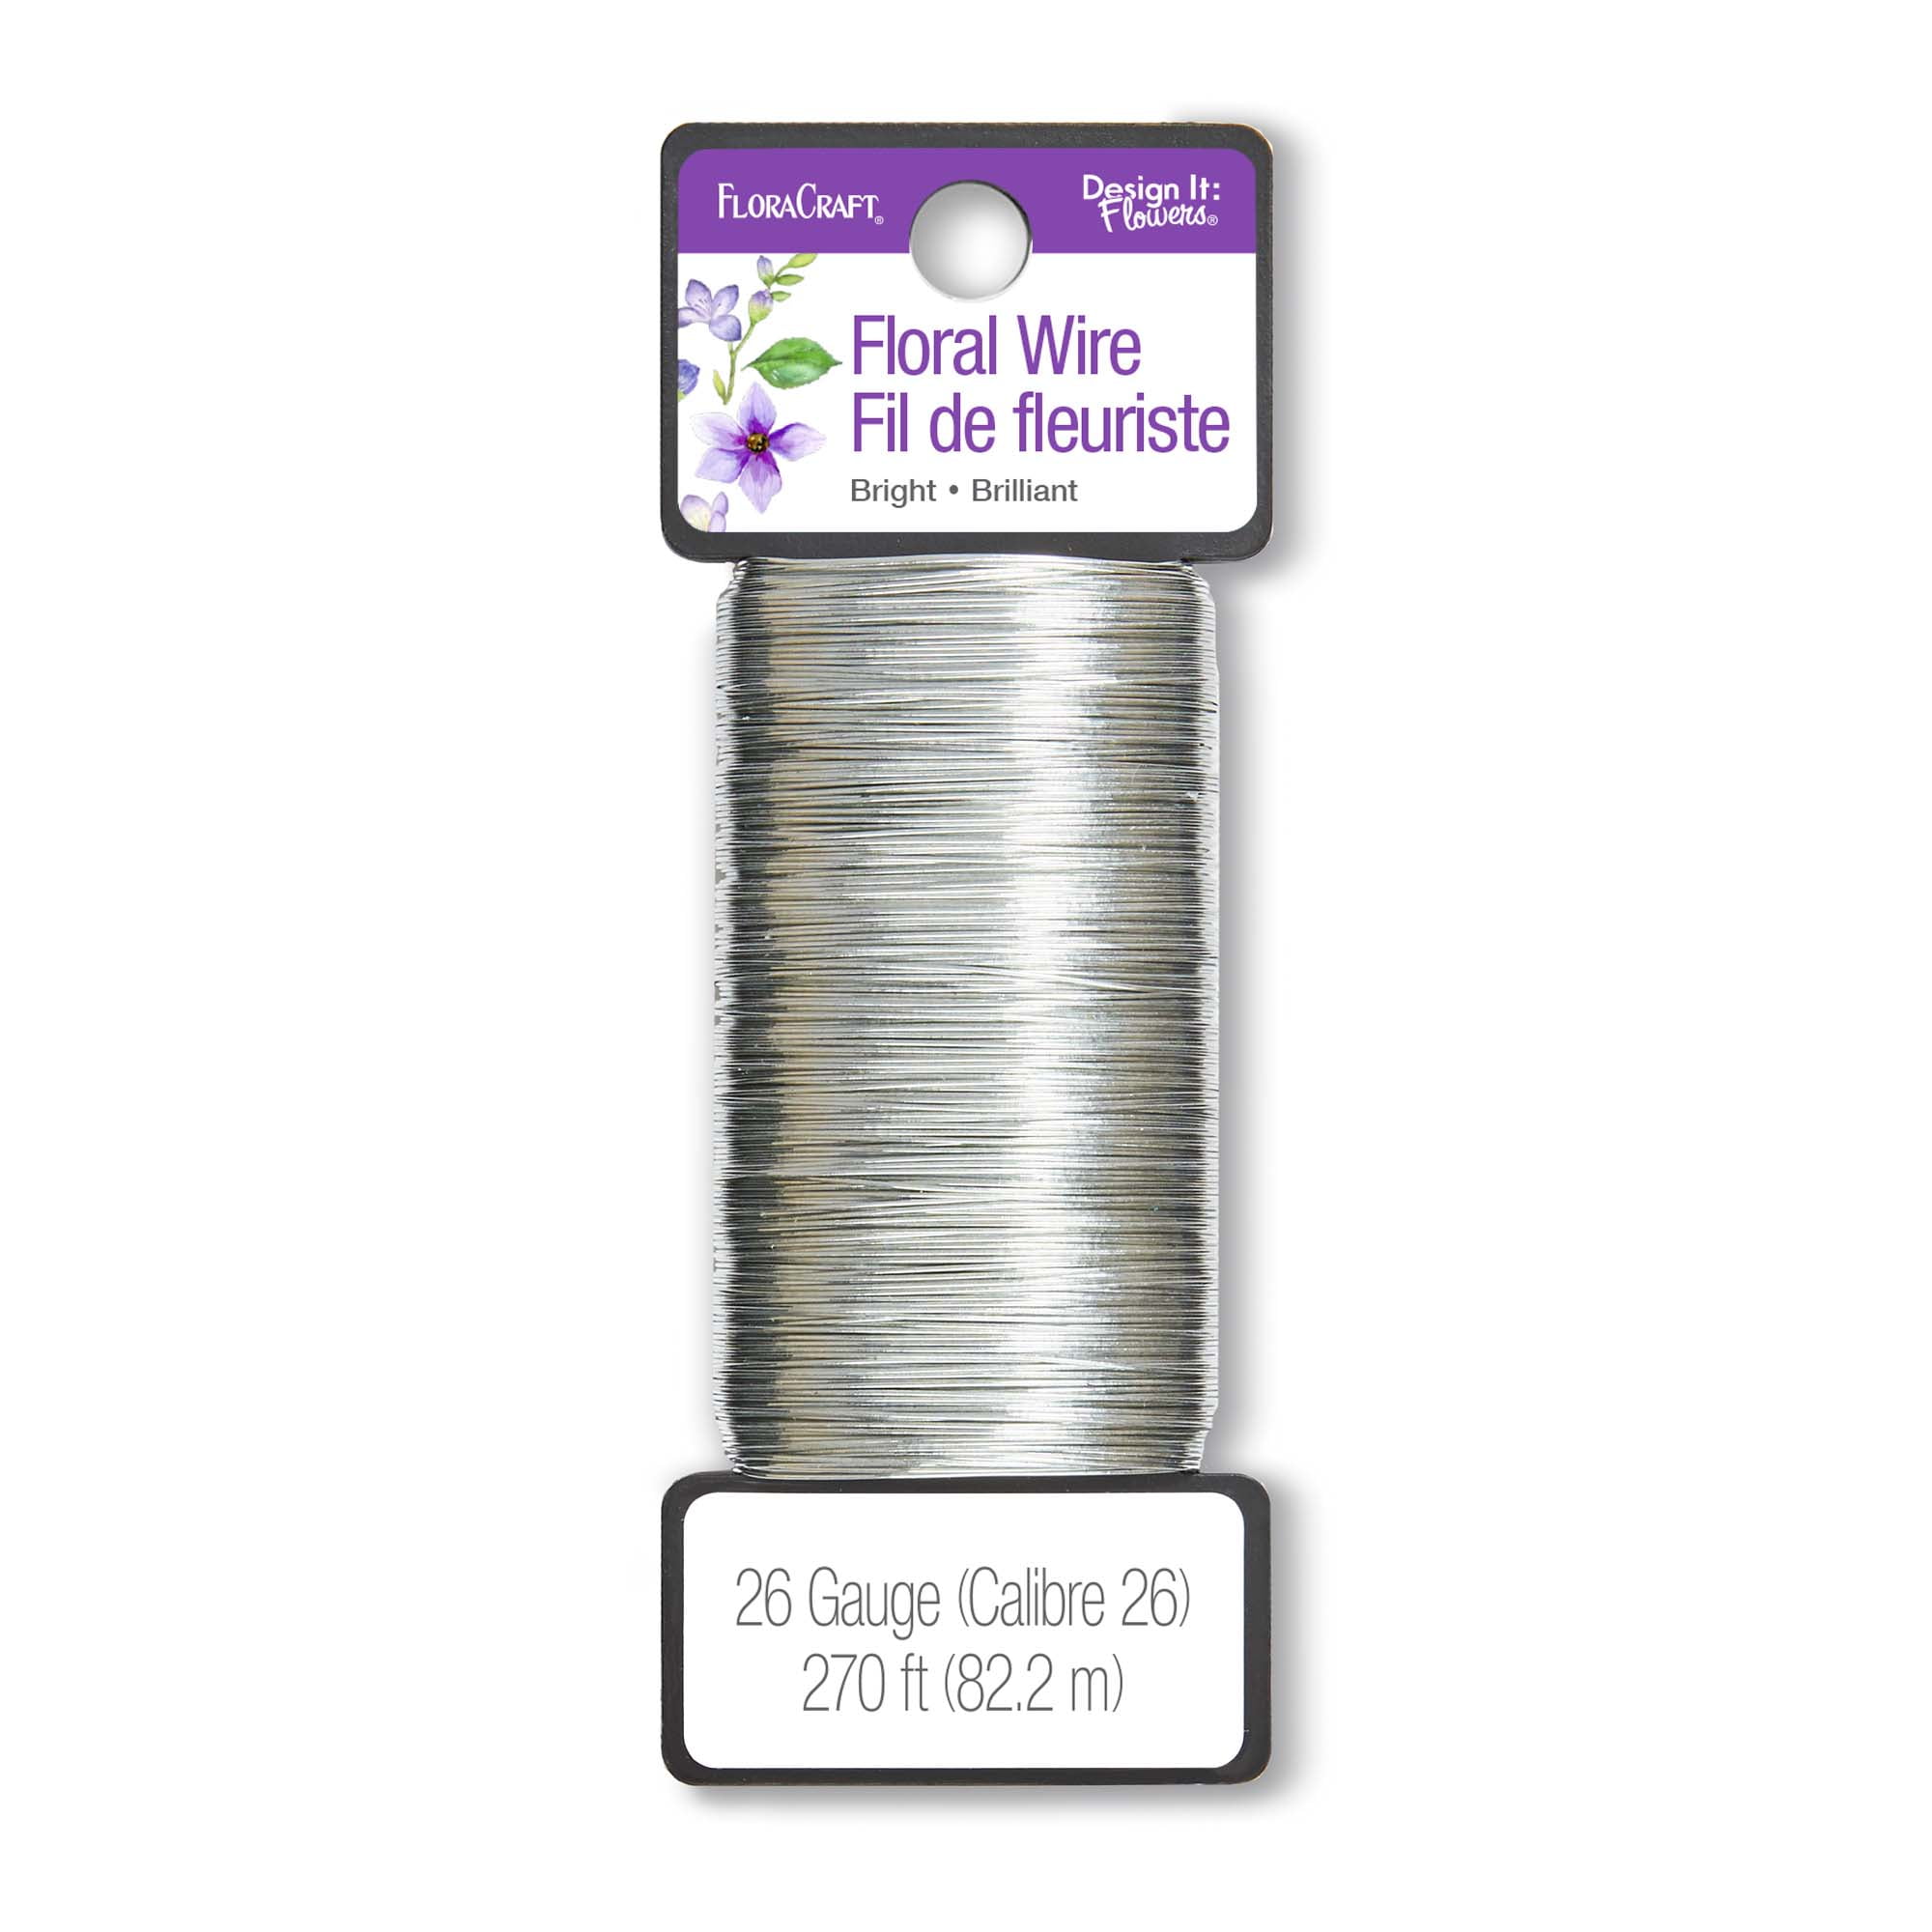 2 Rolls Of Wire Thin Wire For Crafts Flower Wire for Florist Crafts Flower